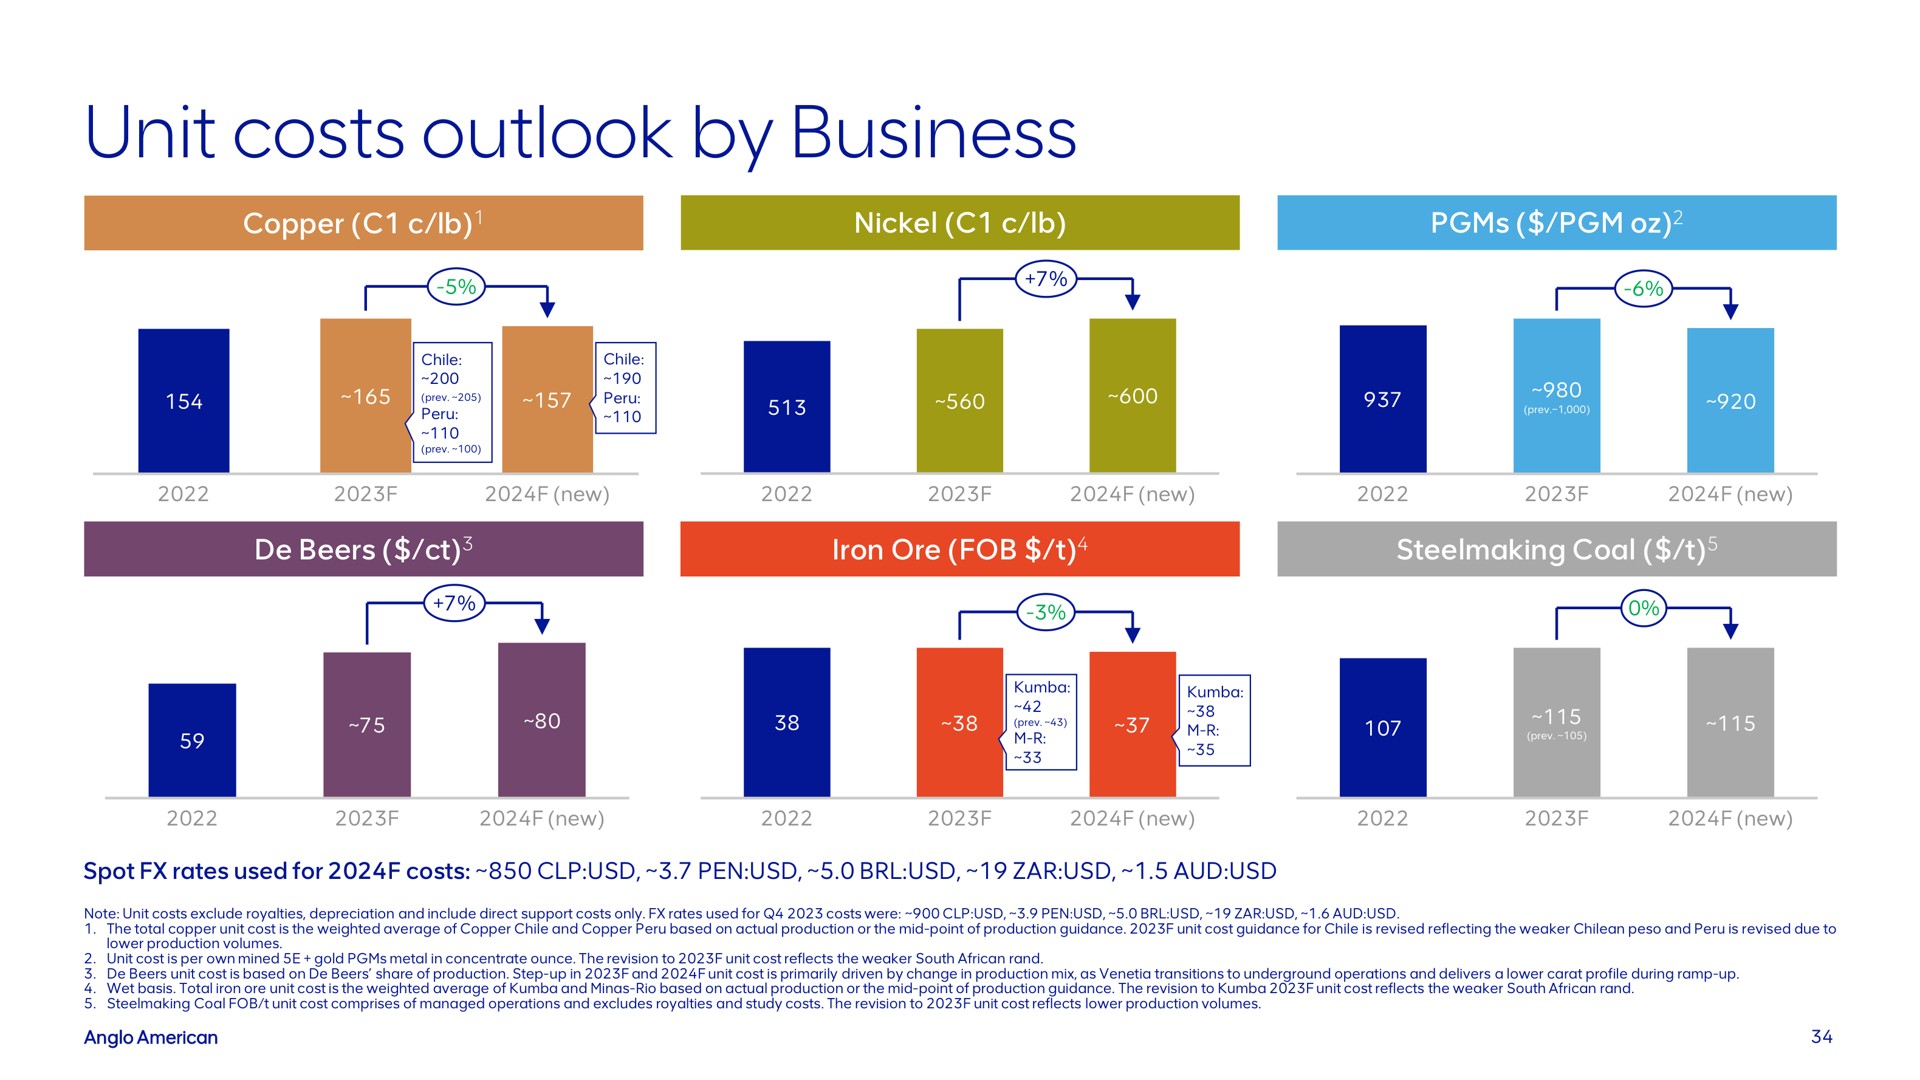 unit costs outlook by business | AngloAmerican